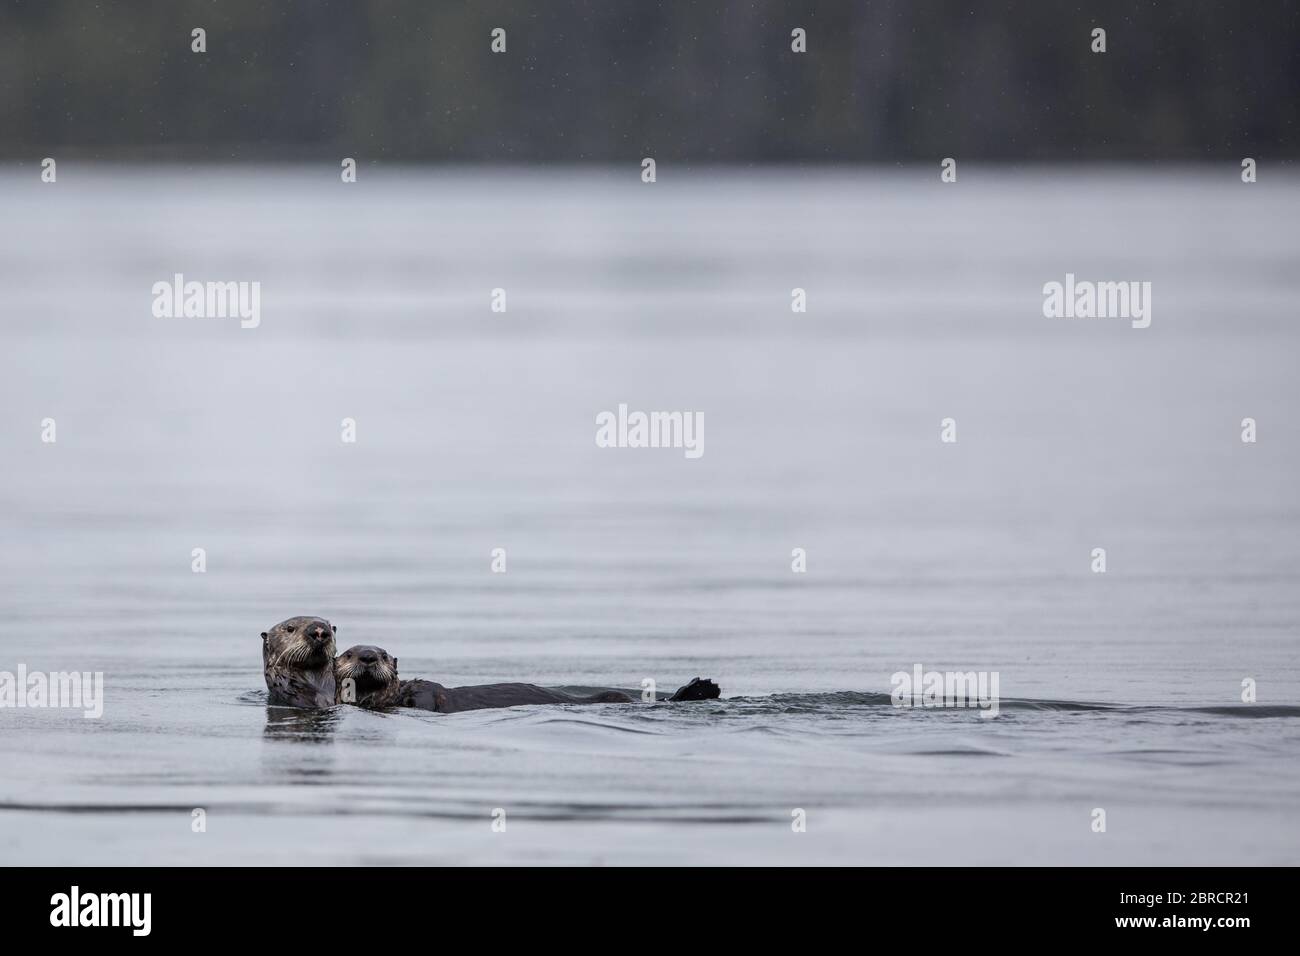 In Southeast Alaska, sea otters, Enhydra lutris, and other wildlife in the Blashke Islands appeal to adventureres on a small ship cruise. Stock Photo